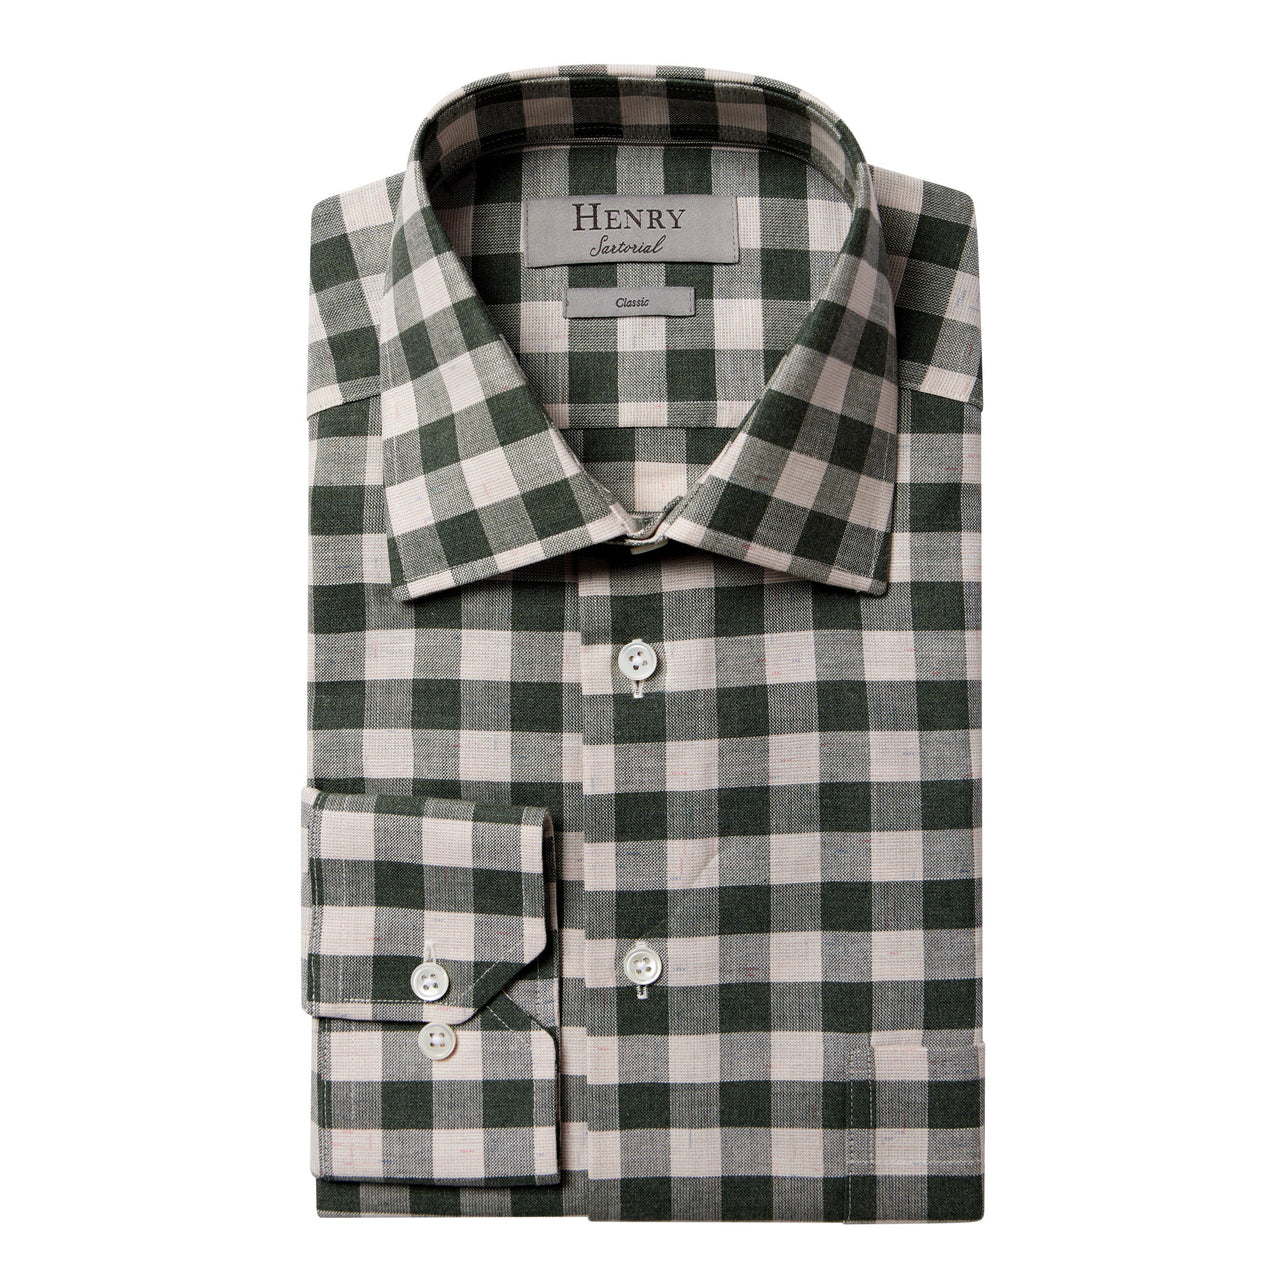 HENRY SARTORIAL Check Casual Shirt OLIVE/BEIGE